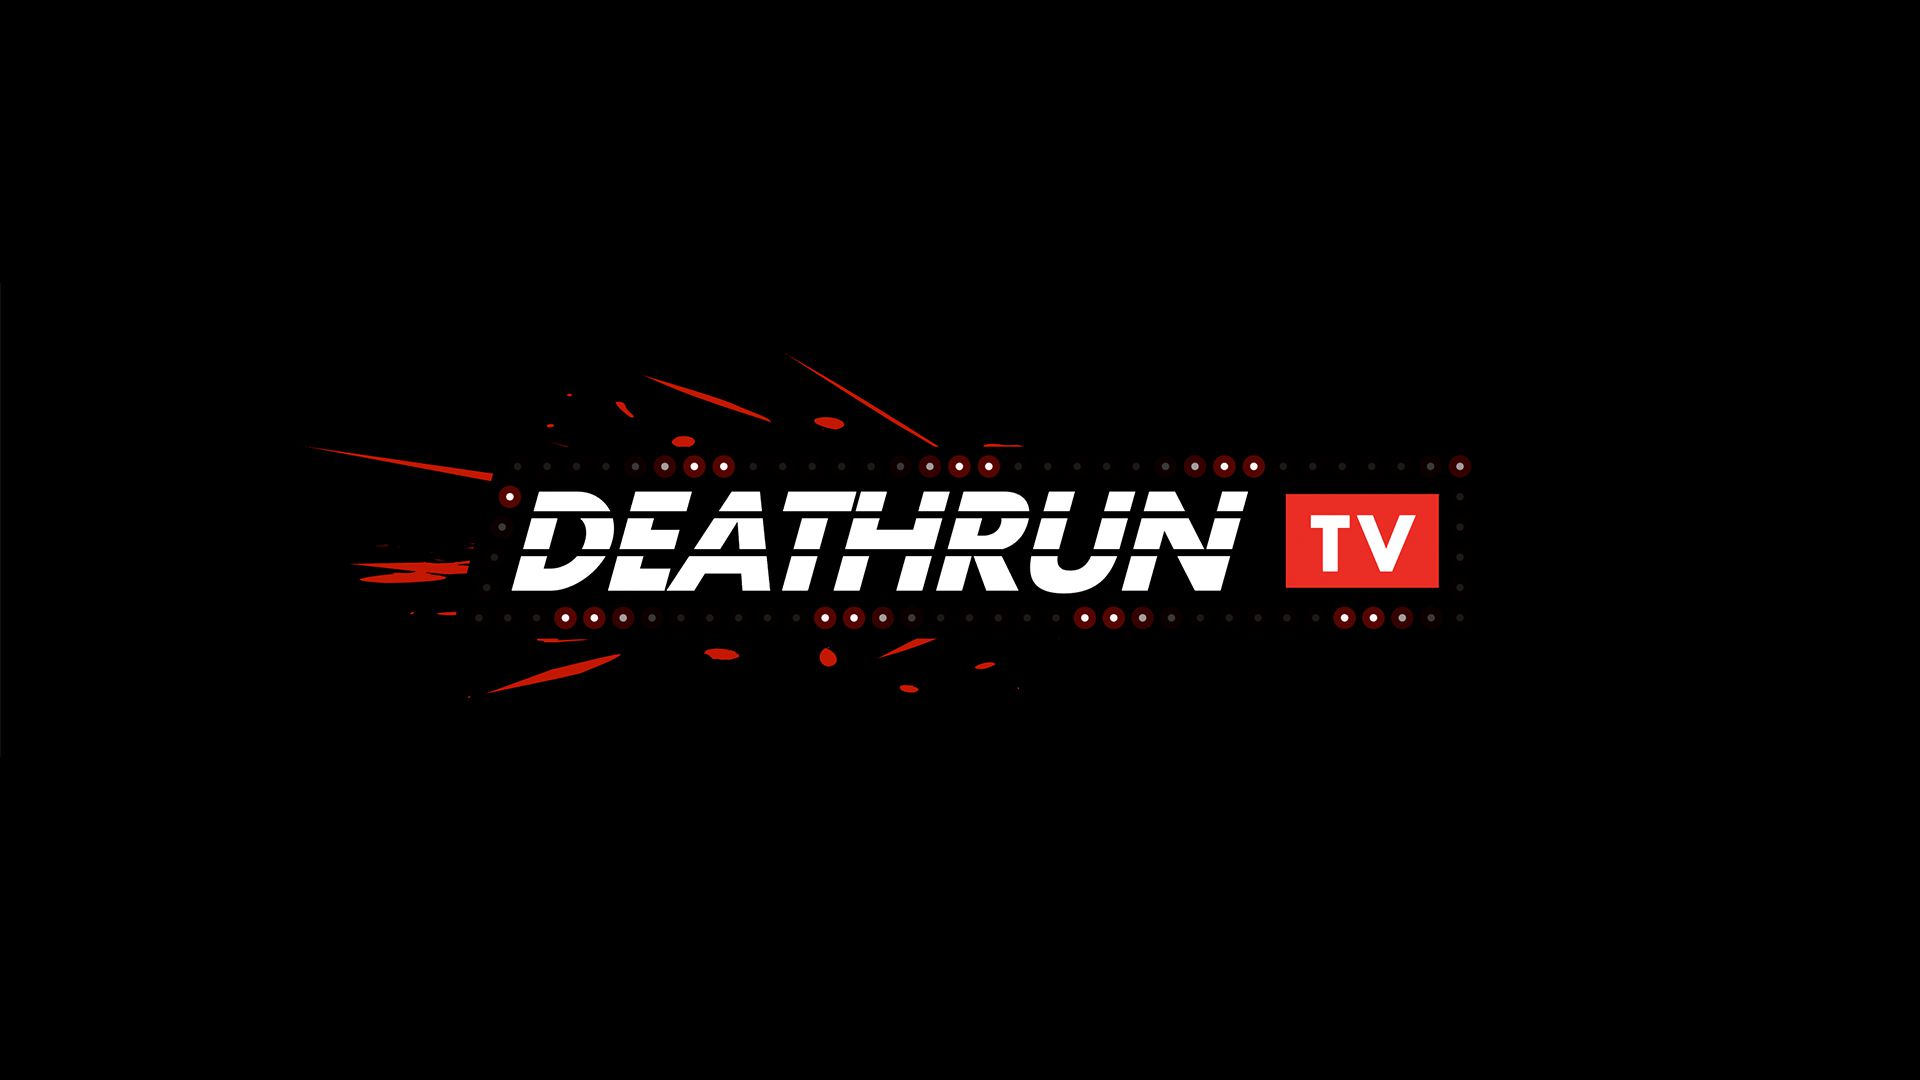 DEATHRUN TV download the last version for ipod